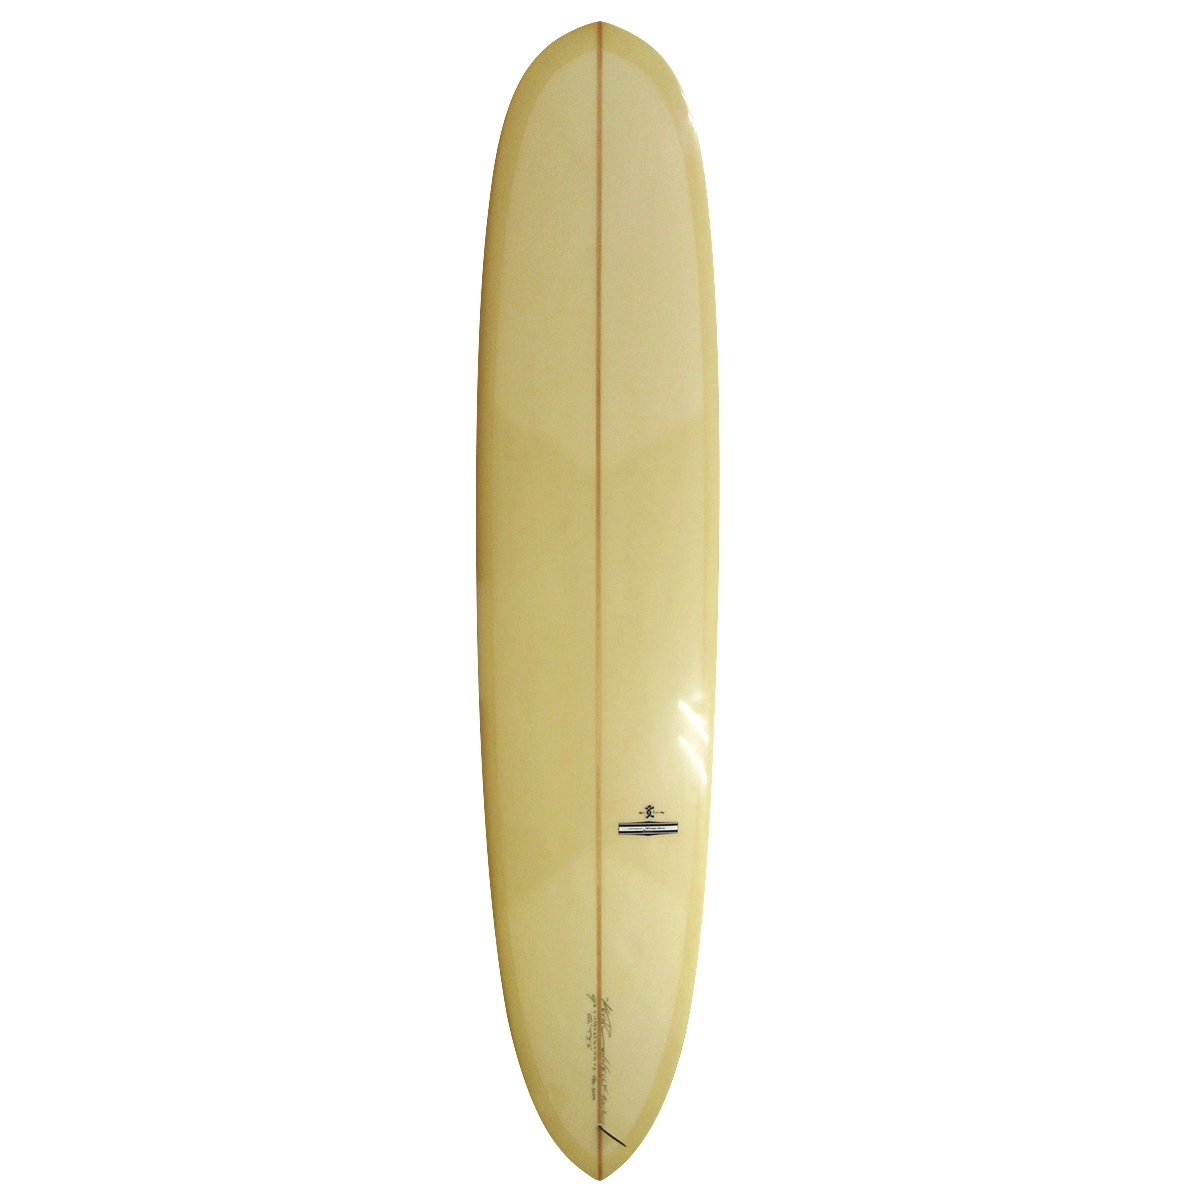 YU SURF CLASSIC / Round Pin Noserider 9`2 Shaped by KEVIN CONNELLY